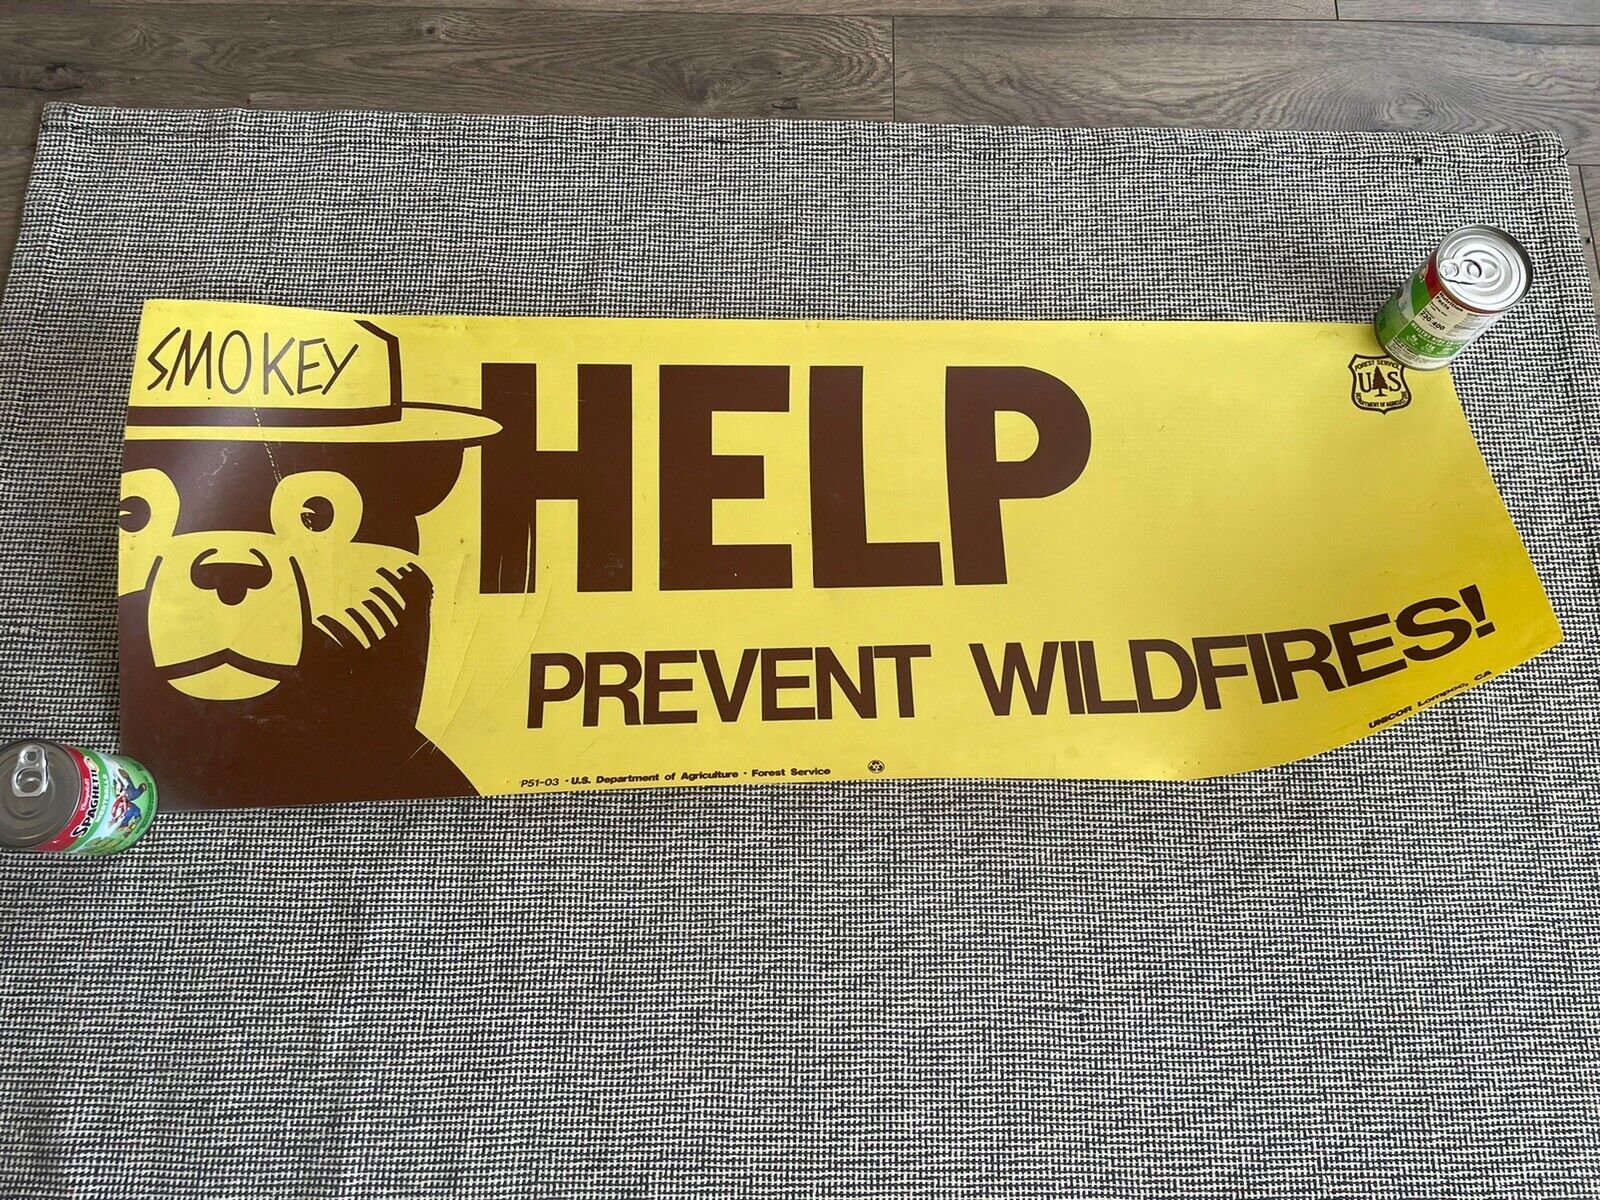 SMOKEY the BEAR FOREST SERVICE BANNER PREVENT WILDFIRES old sign vintage poster